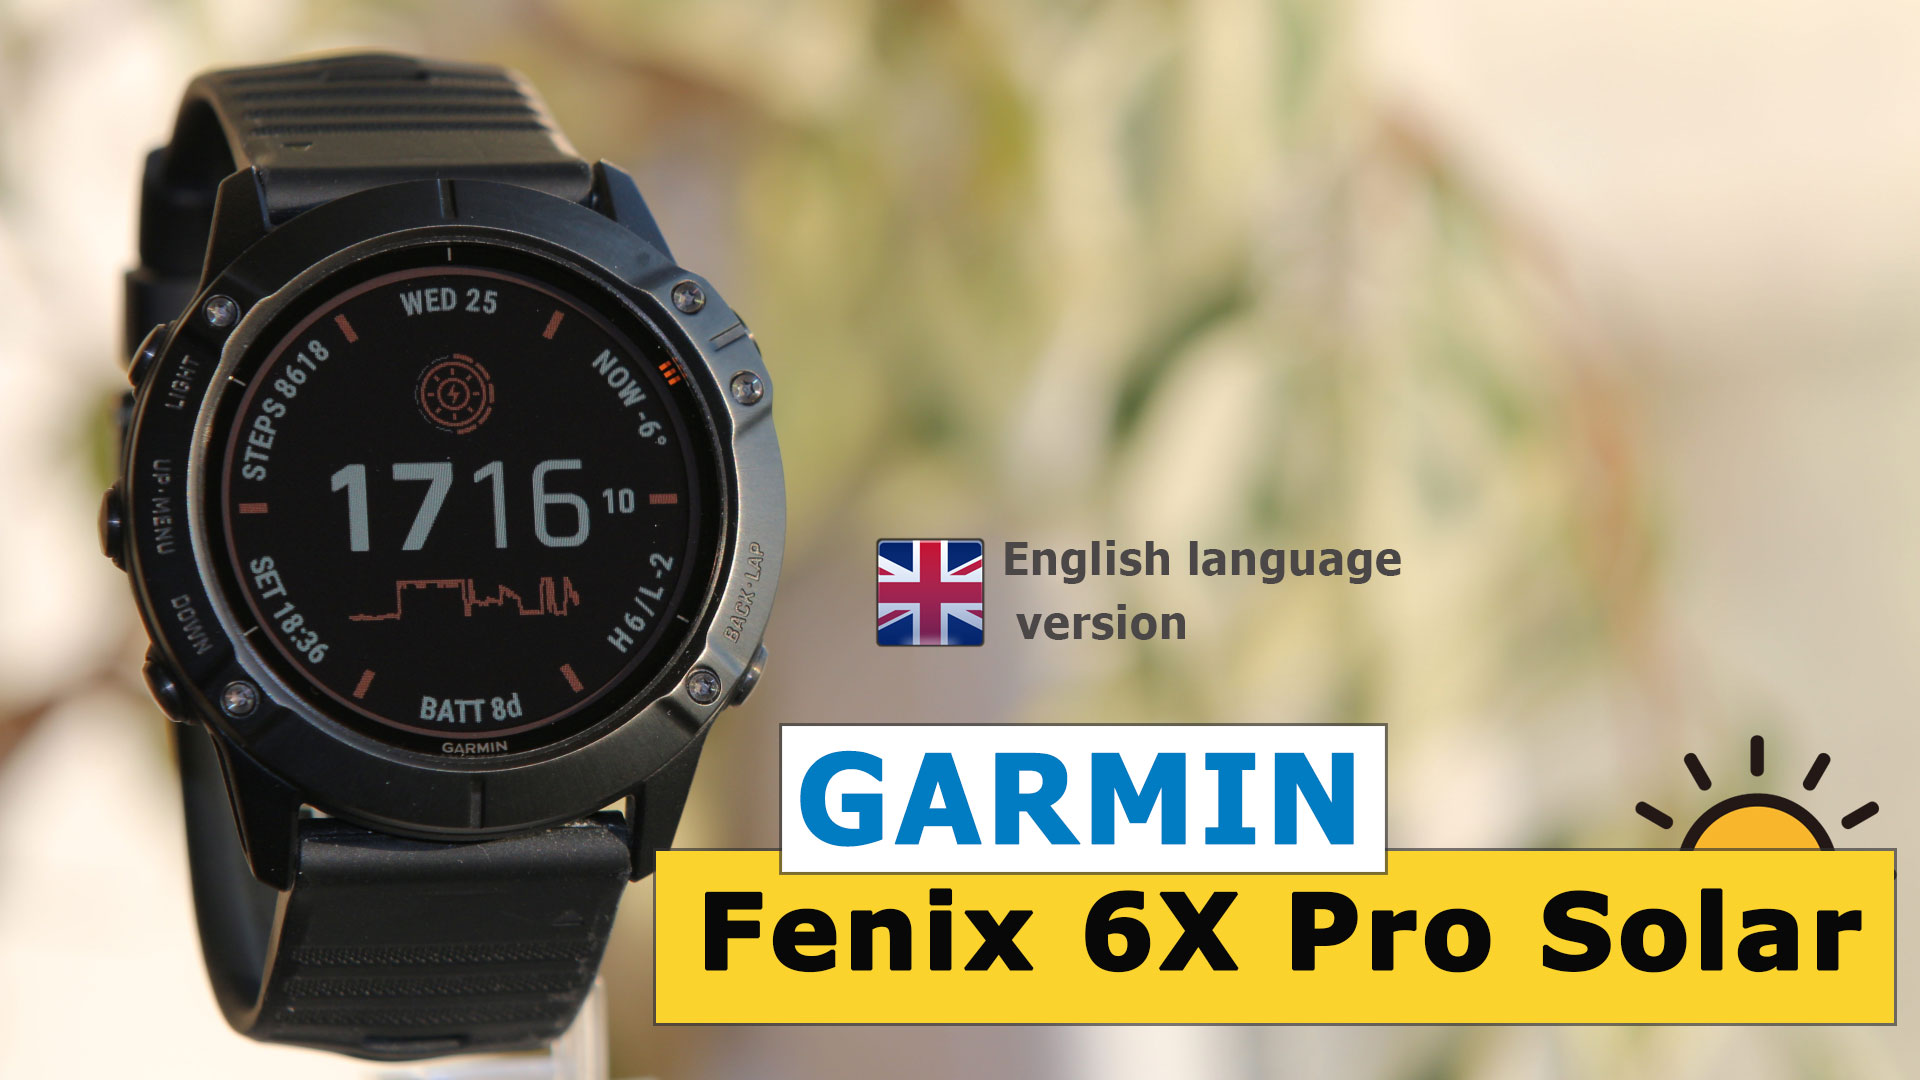 Andet Forberedelse Prelude Garmin Fenix 6X Pro Solar comparison and test in the detailed review